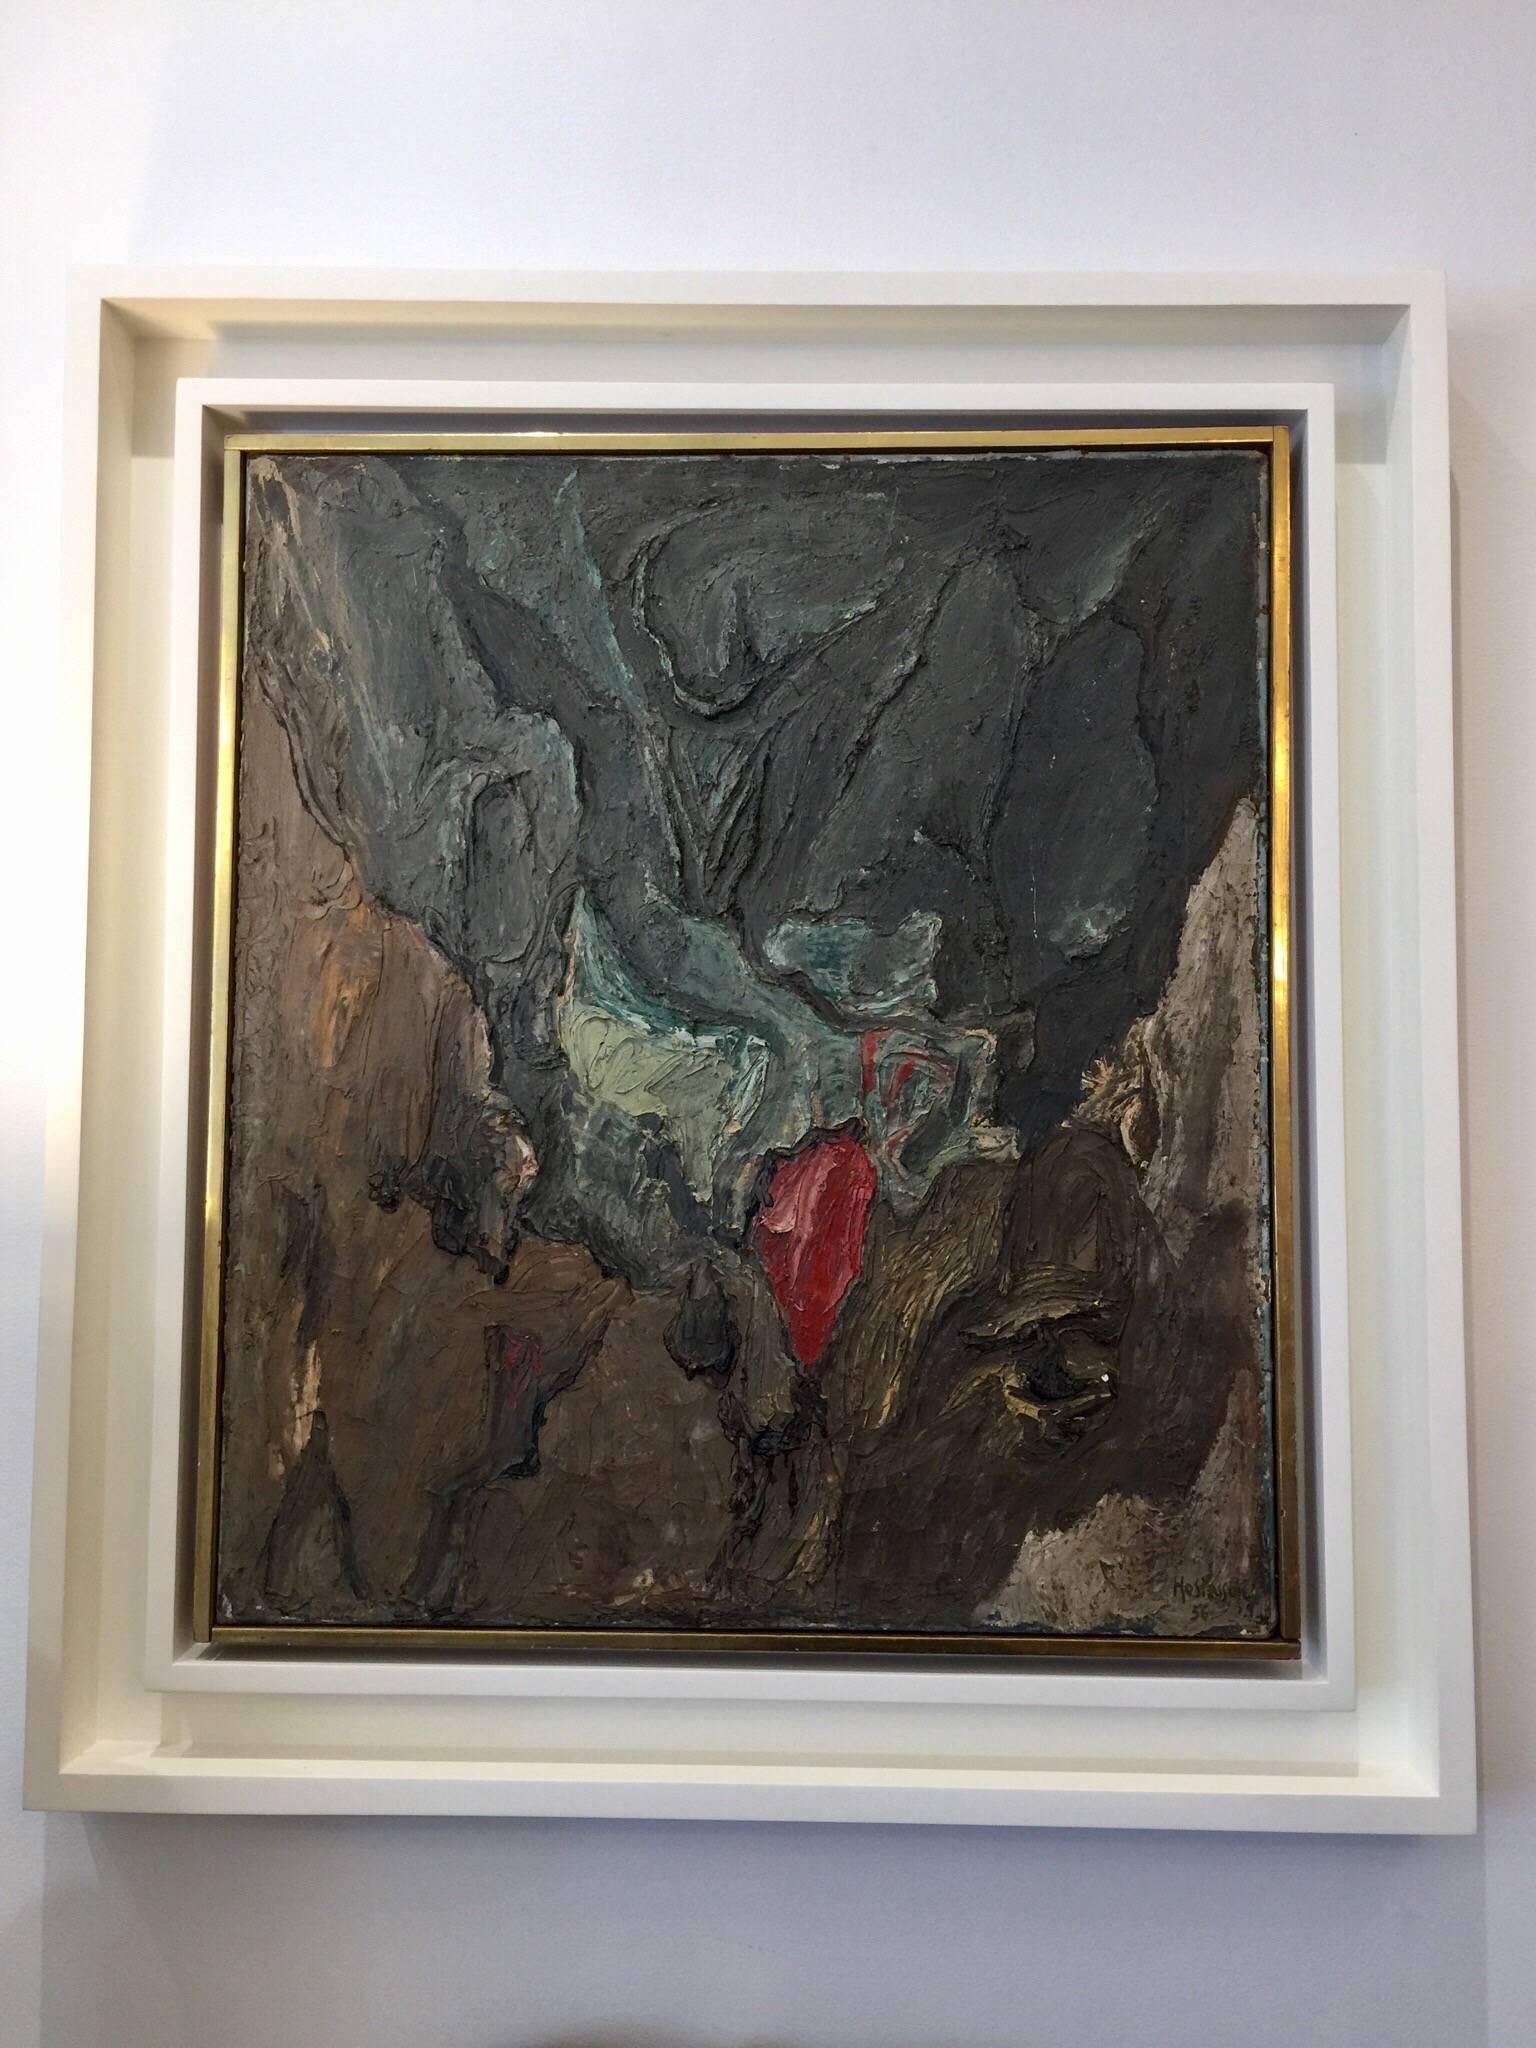 This is a wonderful midcentury textured abstract by important and listed French painter. Signed and titled on reverse 